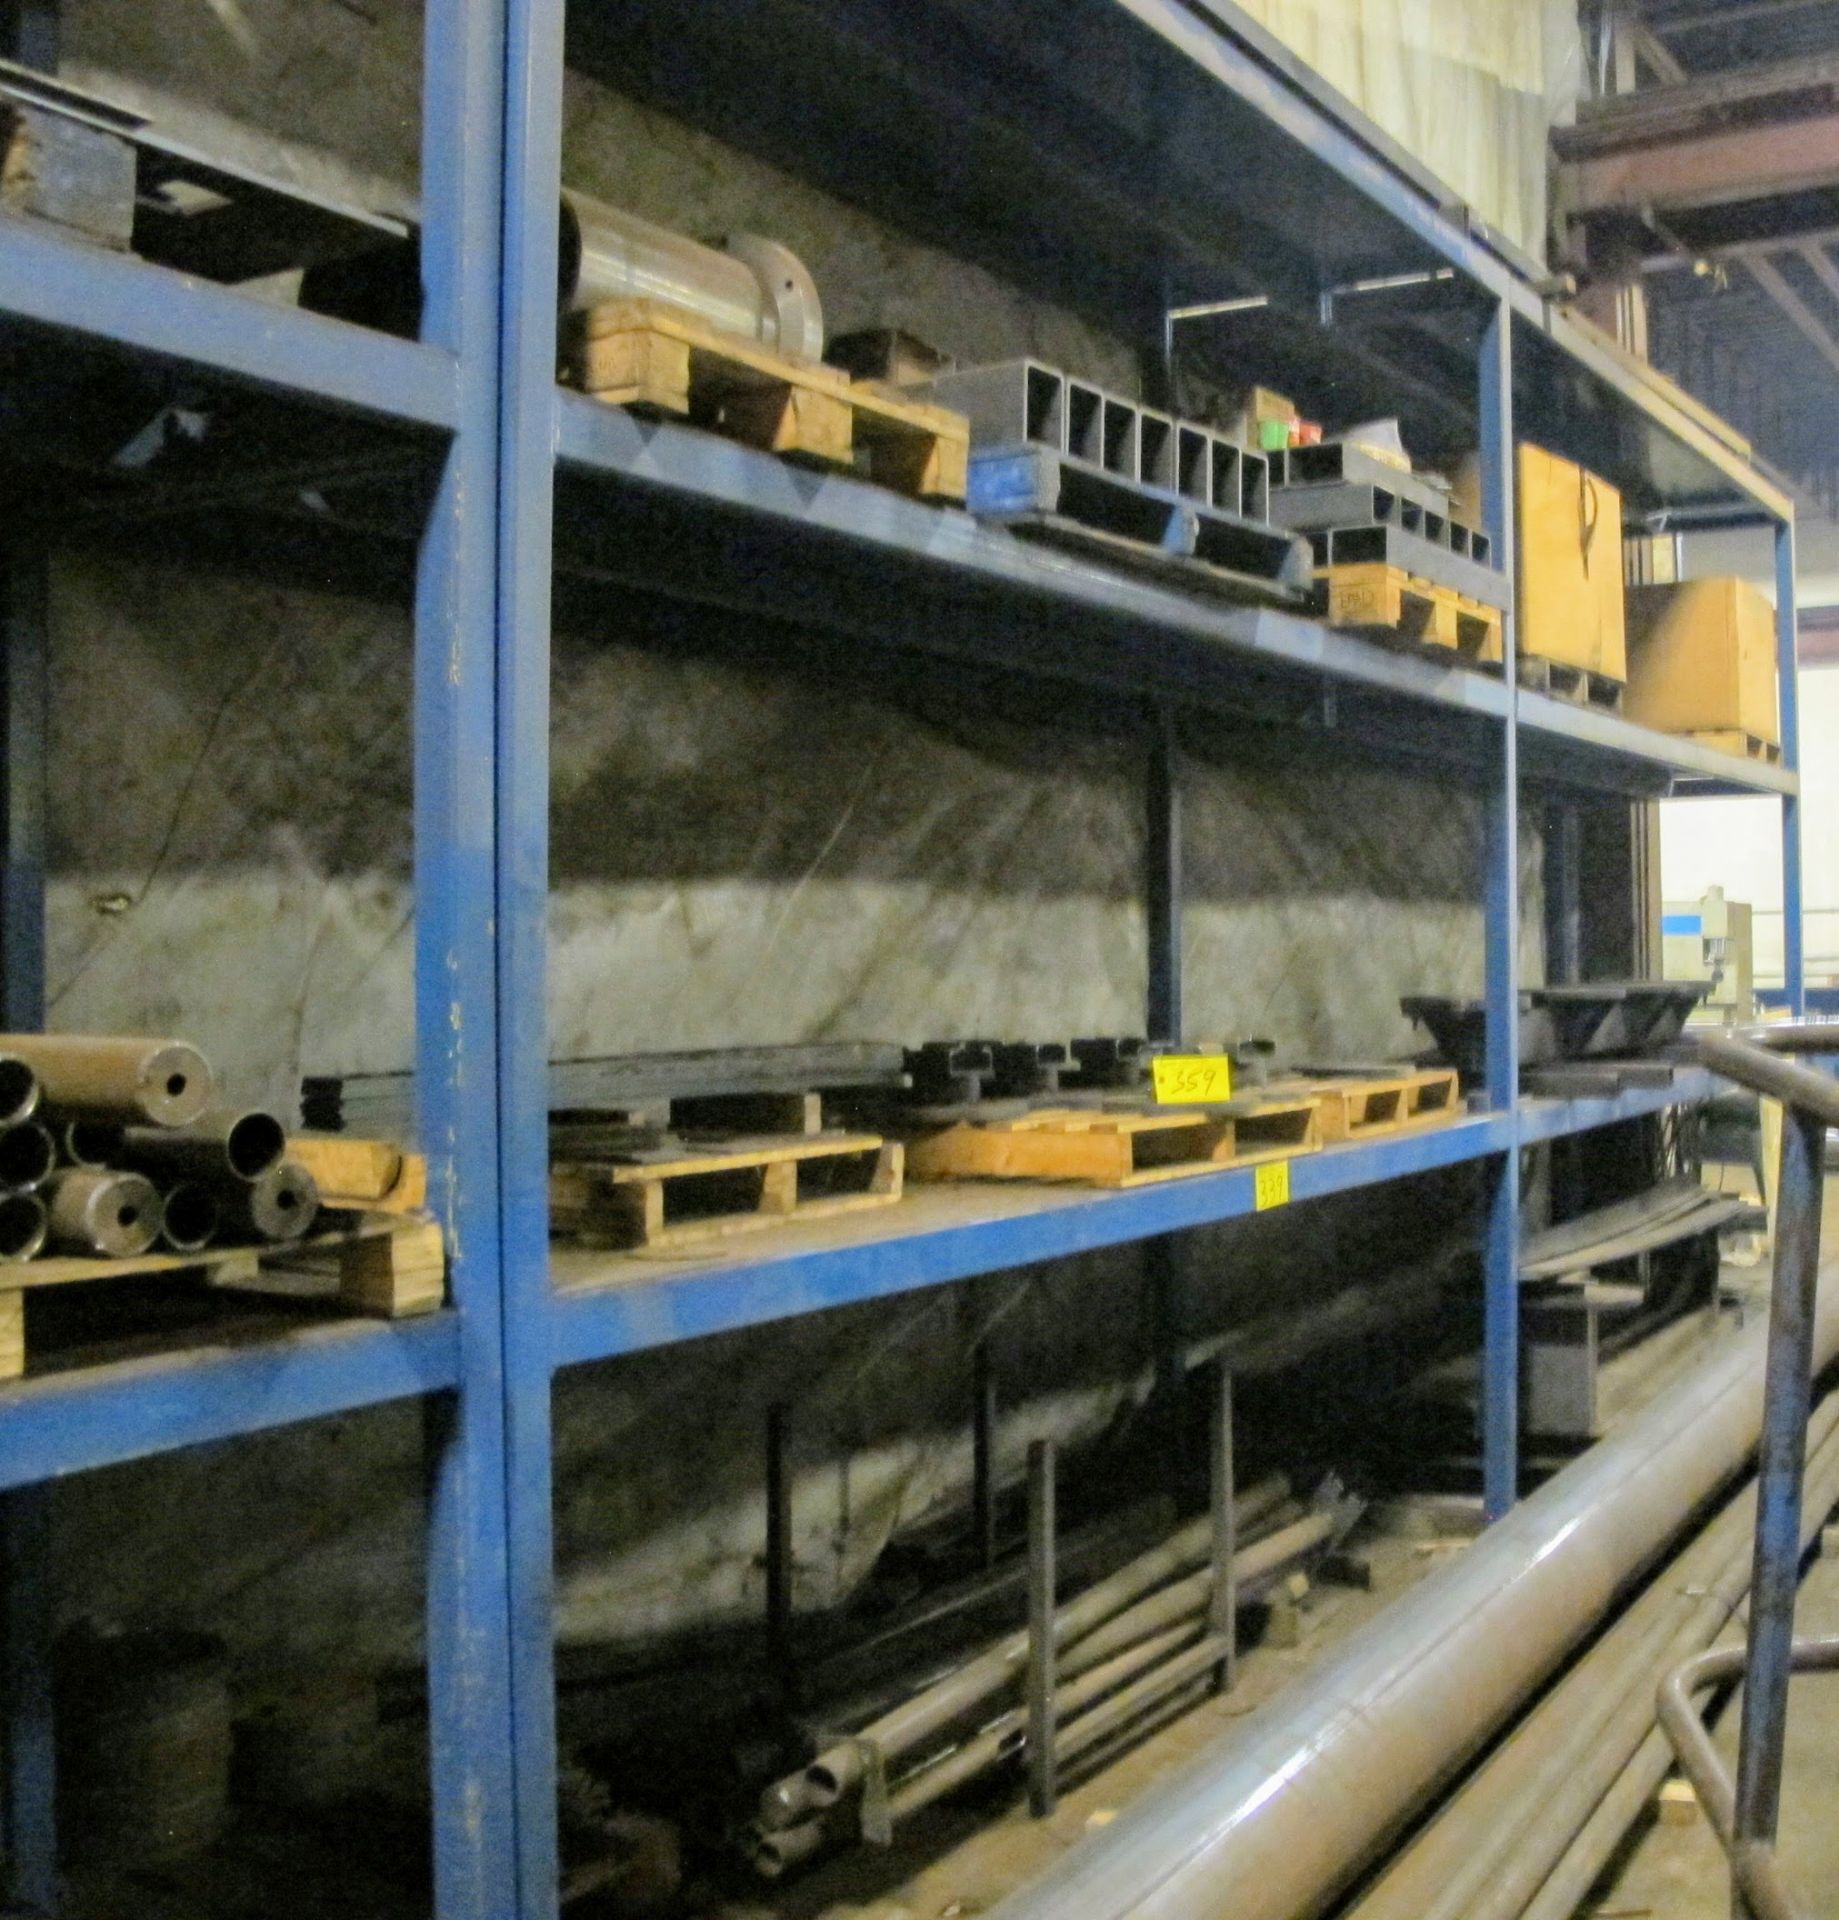 2-SECTIONS OF HEAVY DUTY DIE RACKS (NO CONTENTS)